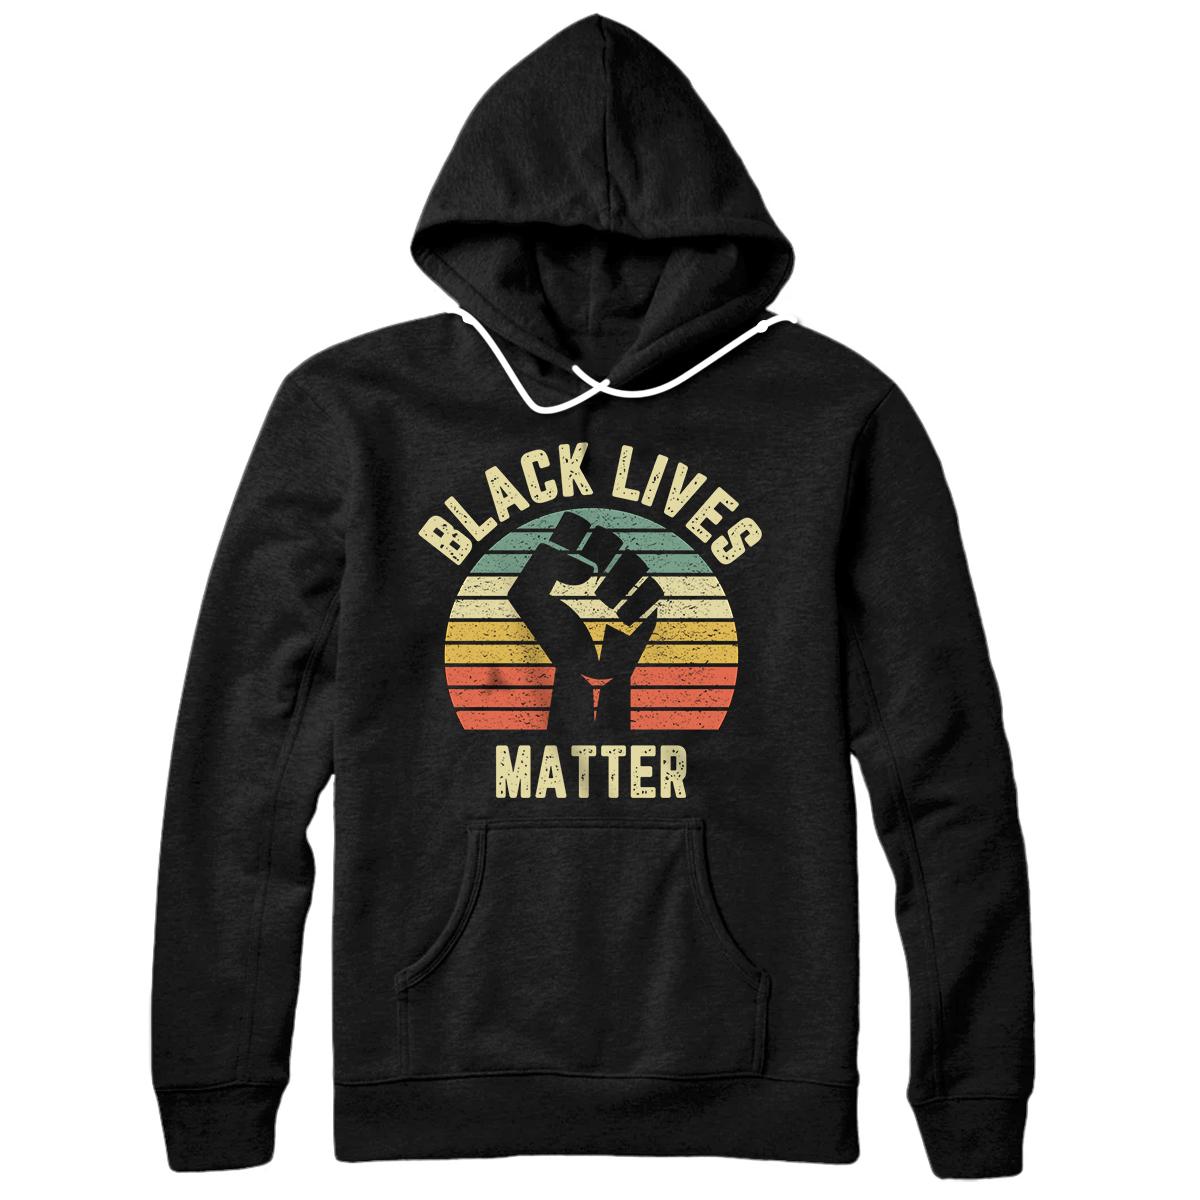 Personalized Black Lives Matter Hoodie Cool Retro Design for BLM Pullover Hoodie